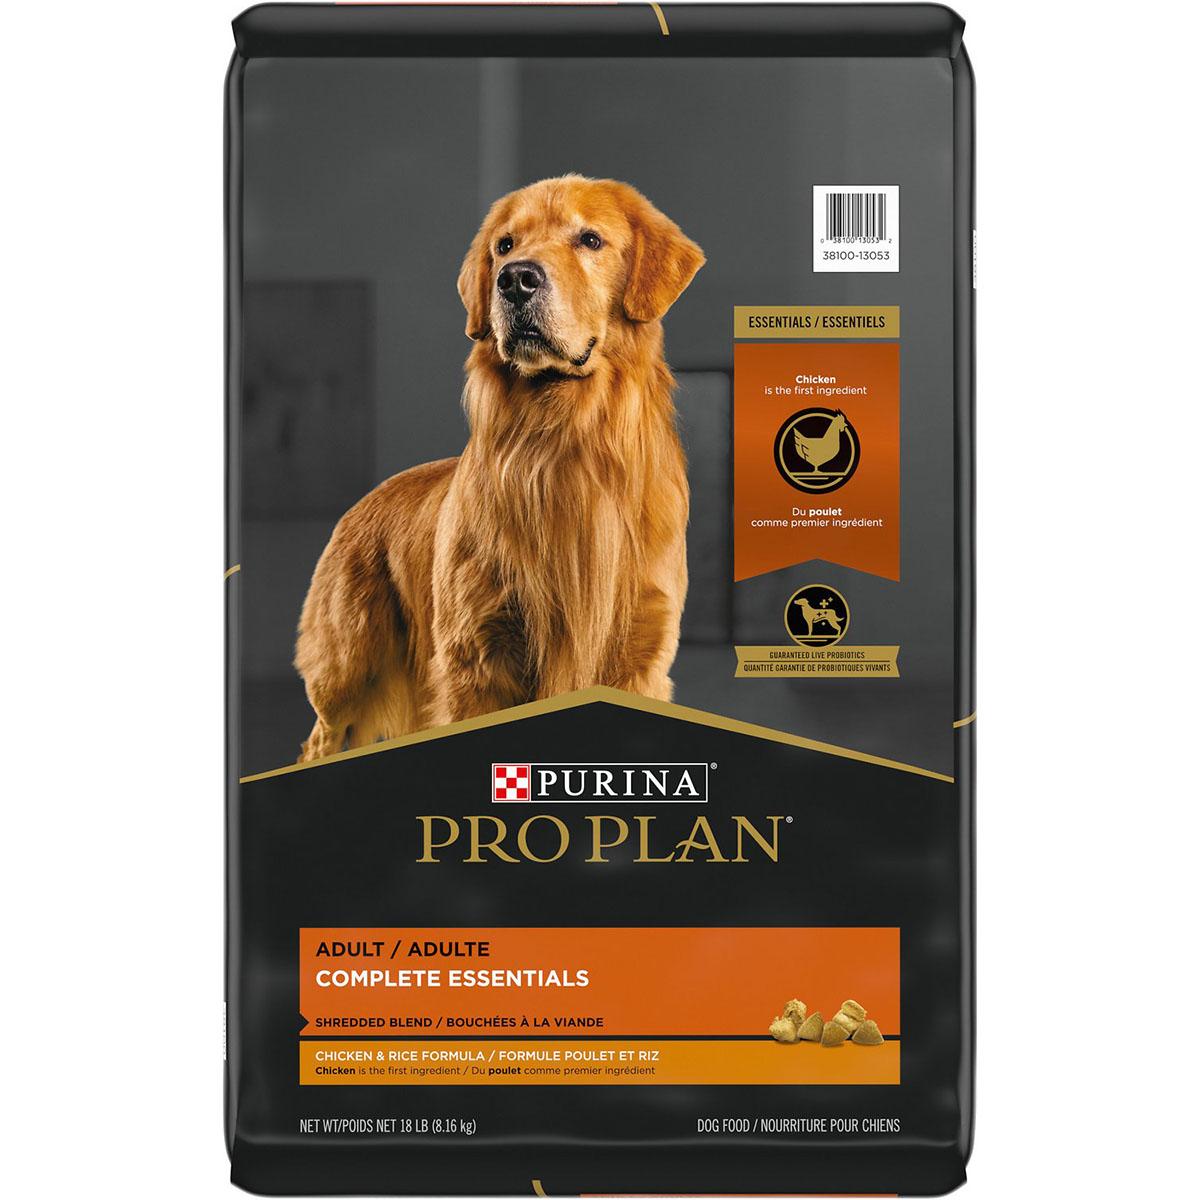 Purina Pro Plan Adult Shredded Blend Chicken & Rice Dry Dog Food 